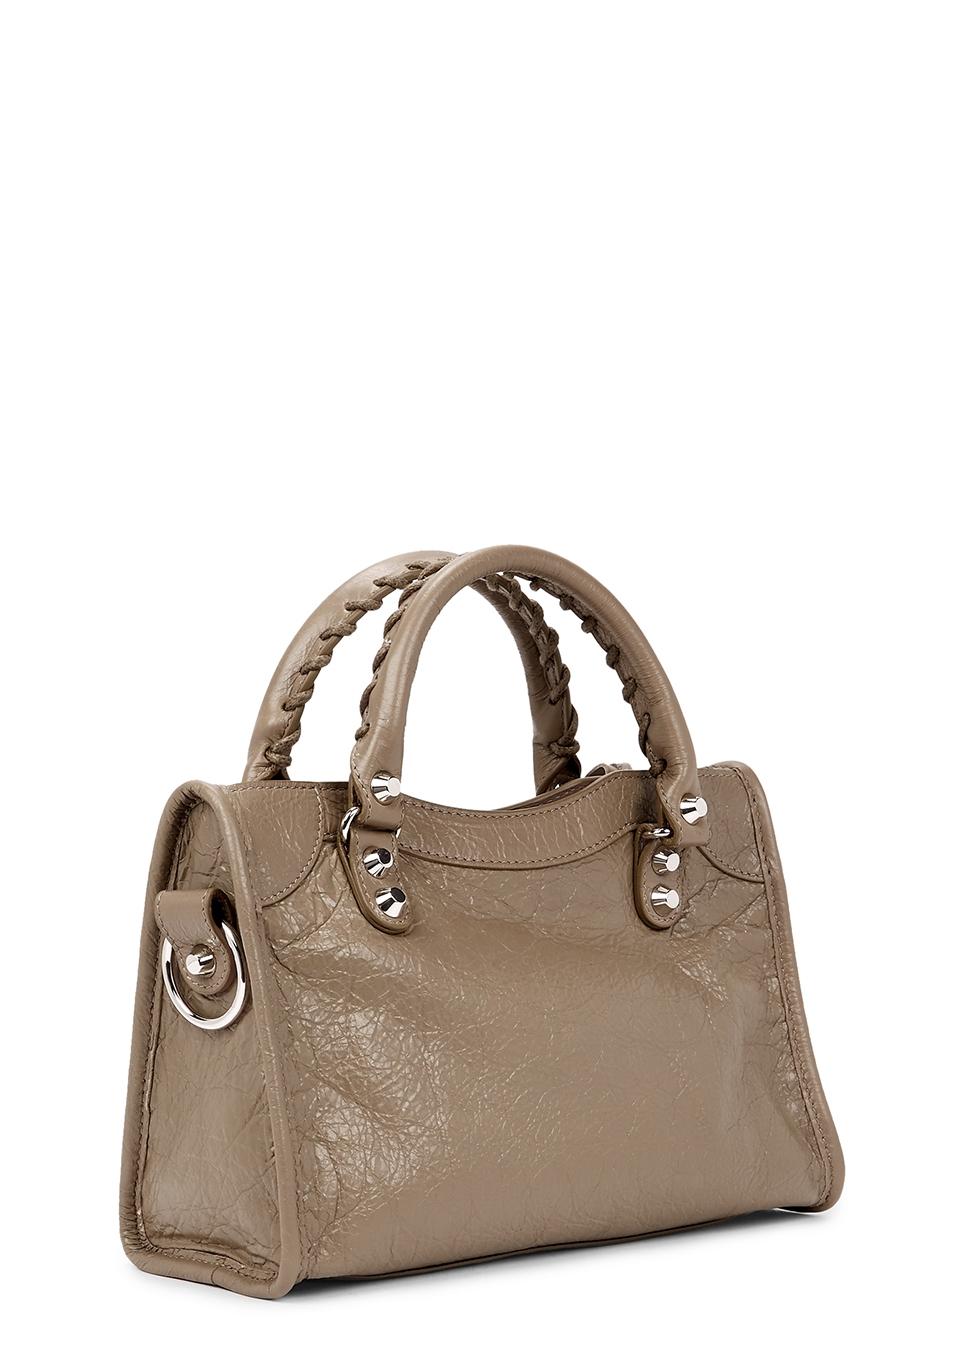 Balenciaga Classic City Mini Taupe Leather Shoulder Bag in Gray | Lyst